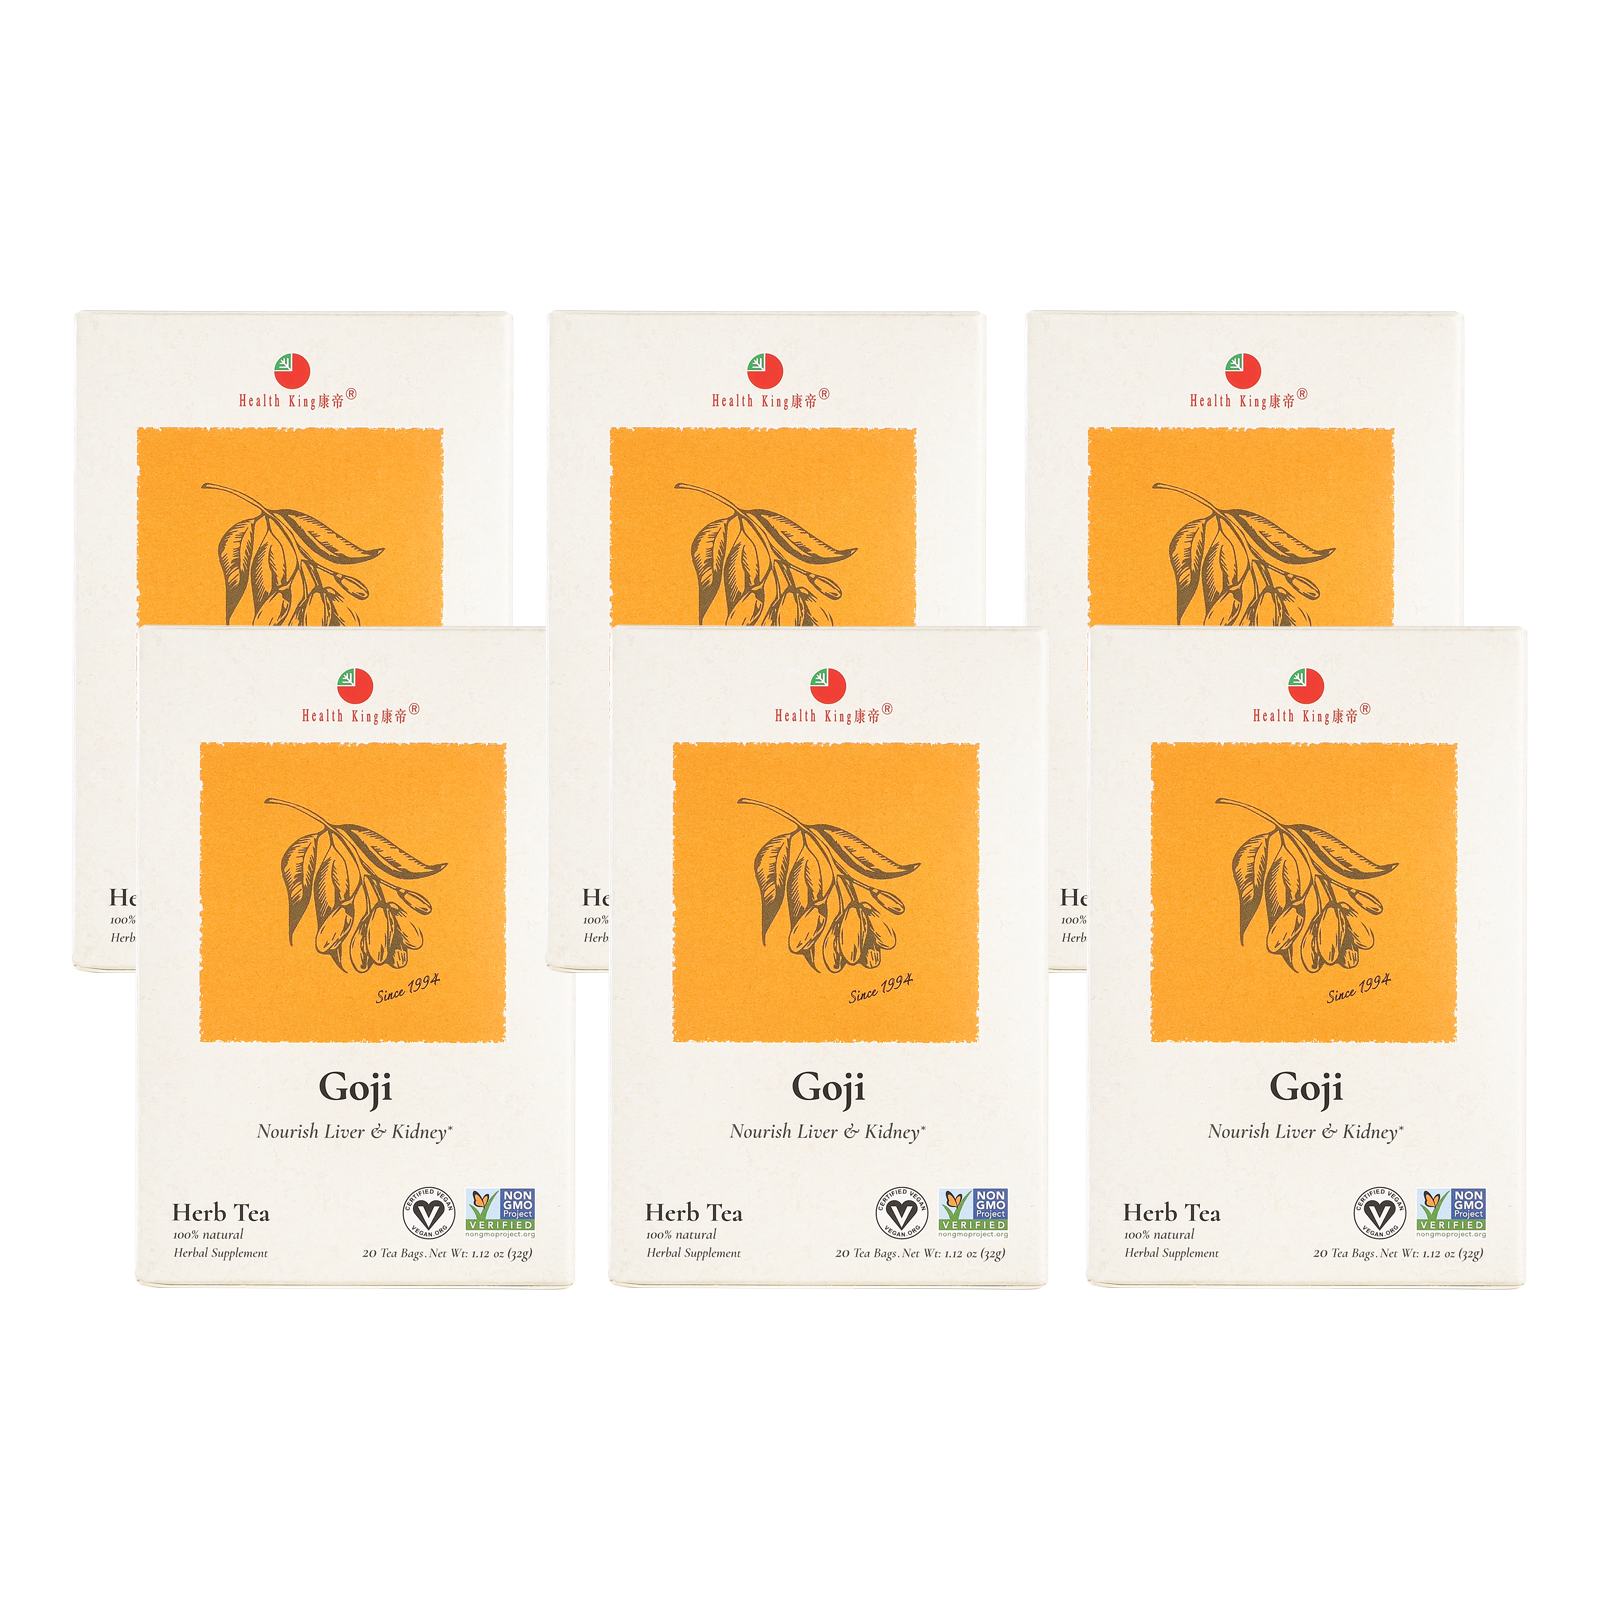 Six boxes of Goji Herb Tea presented on a white surface